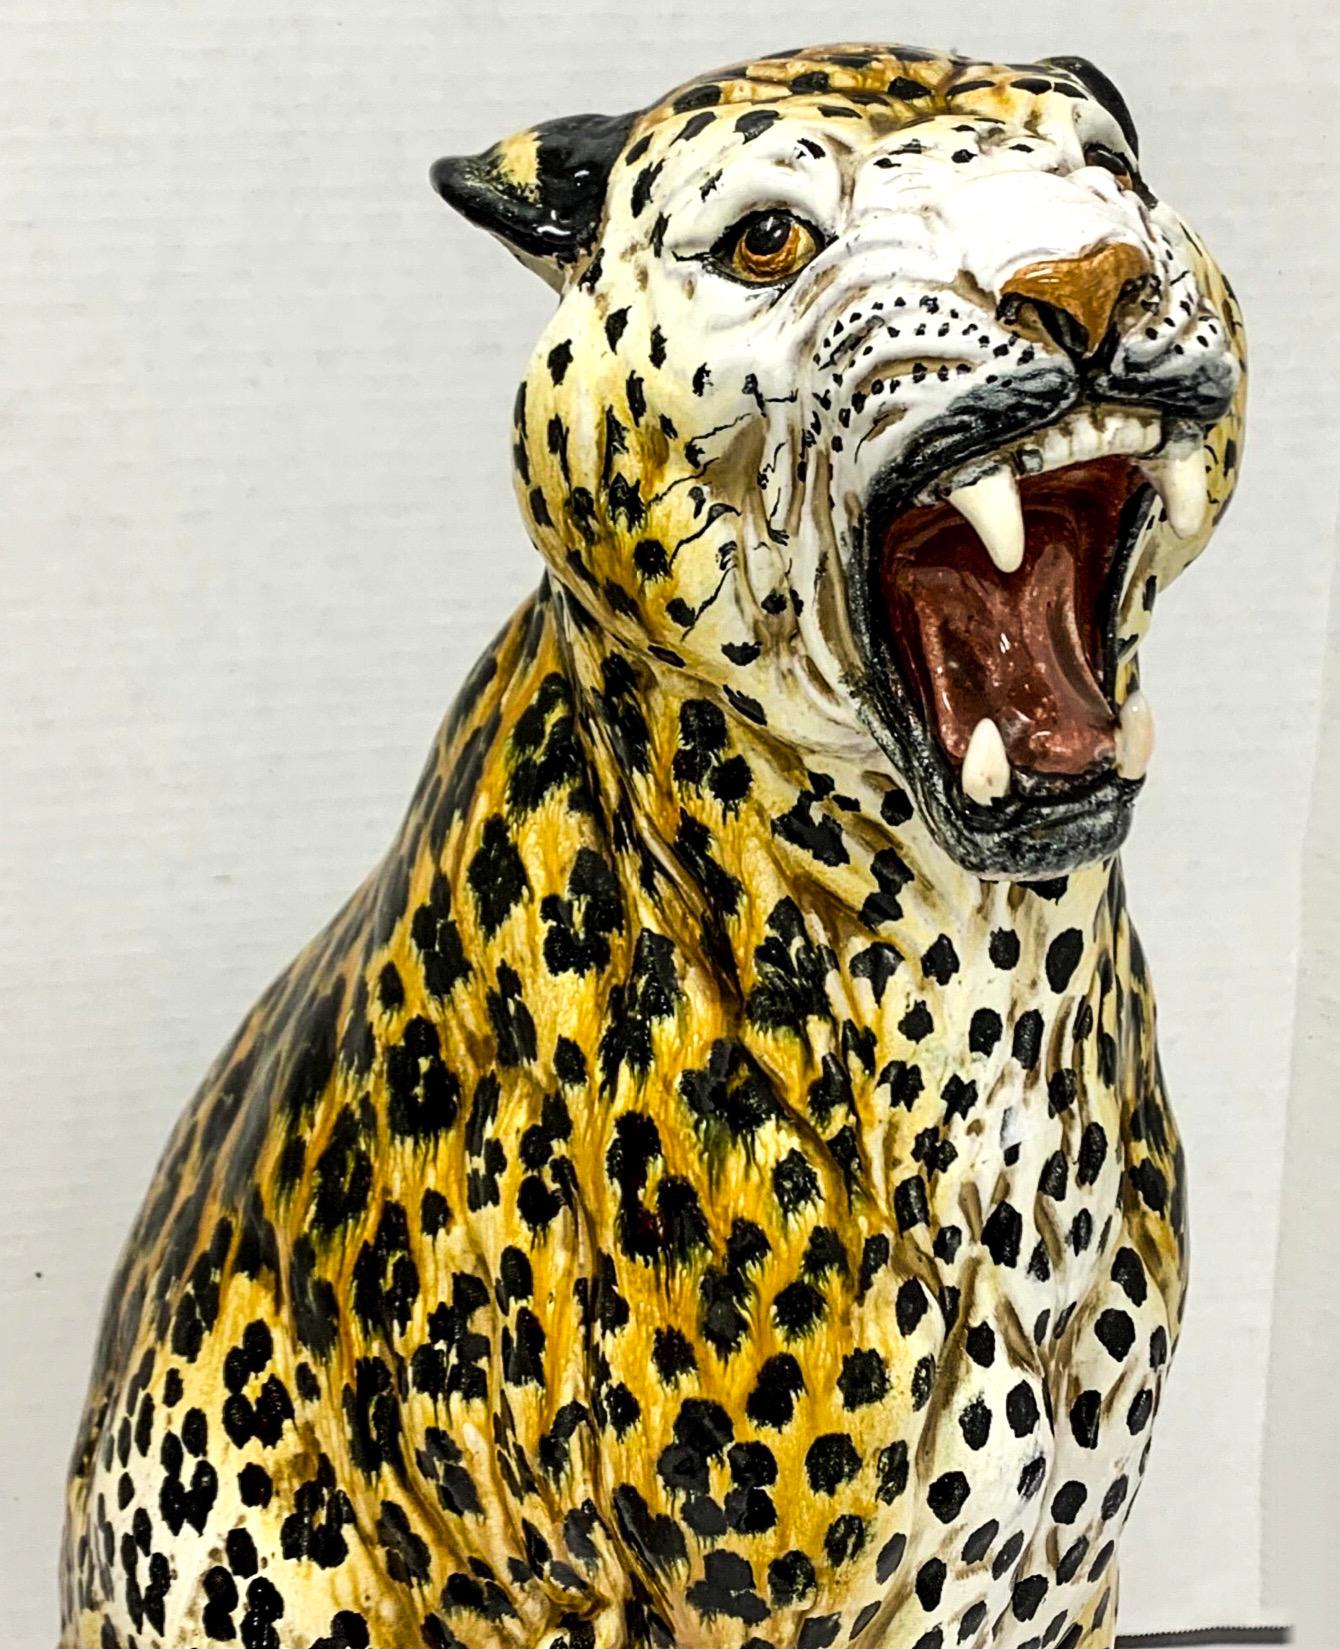 Love my terracotta animals! This is a large scale Hollywood Regency Era Italian leopard. He is in very good condition with his vibrant hand painted finish.